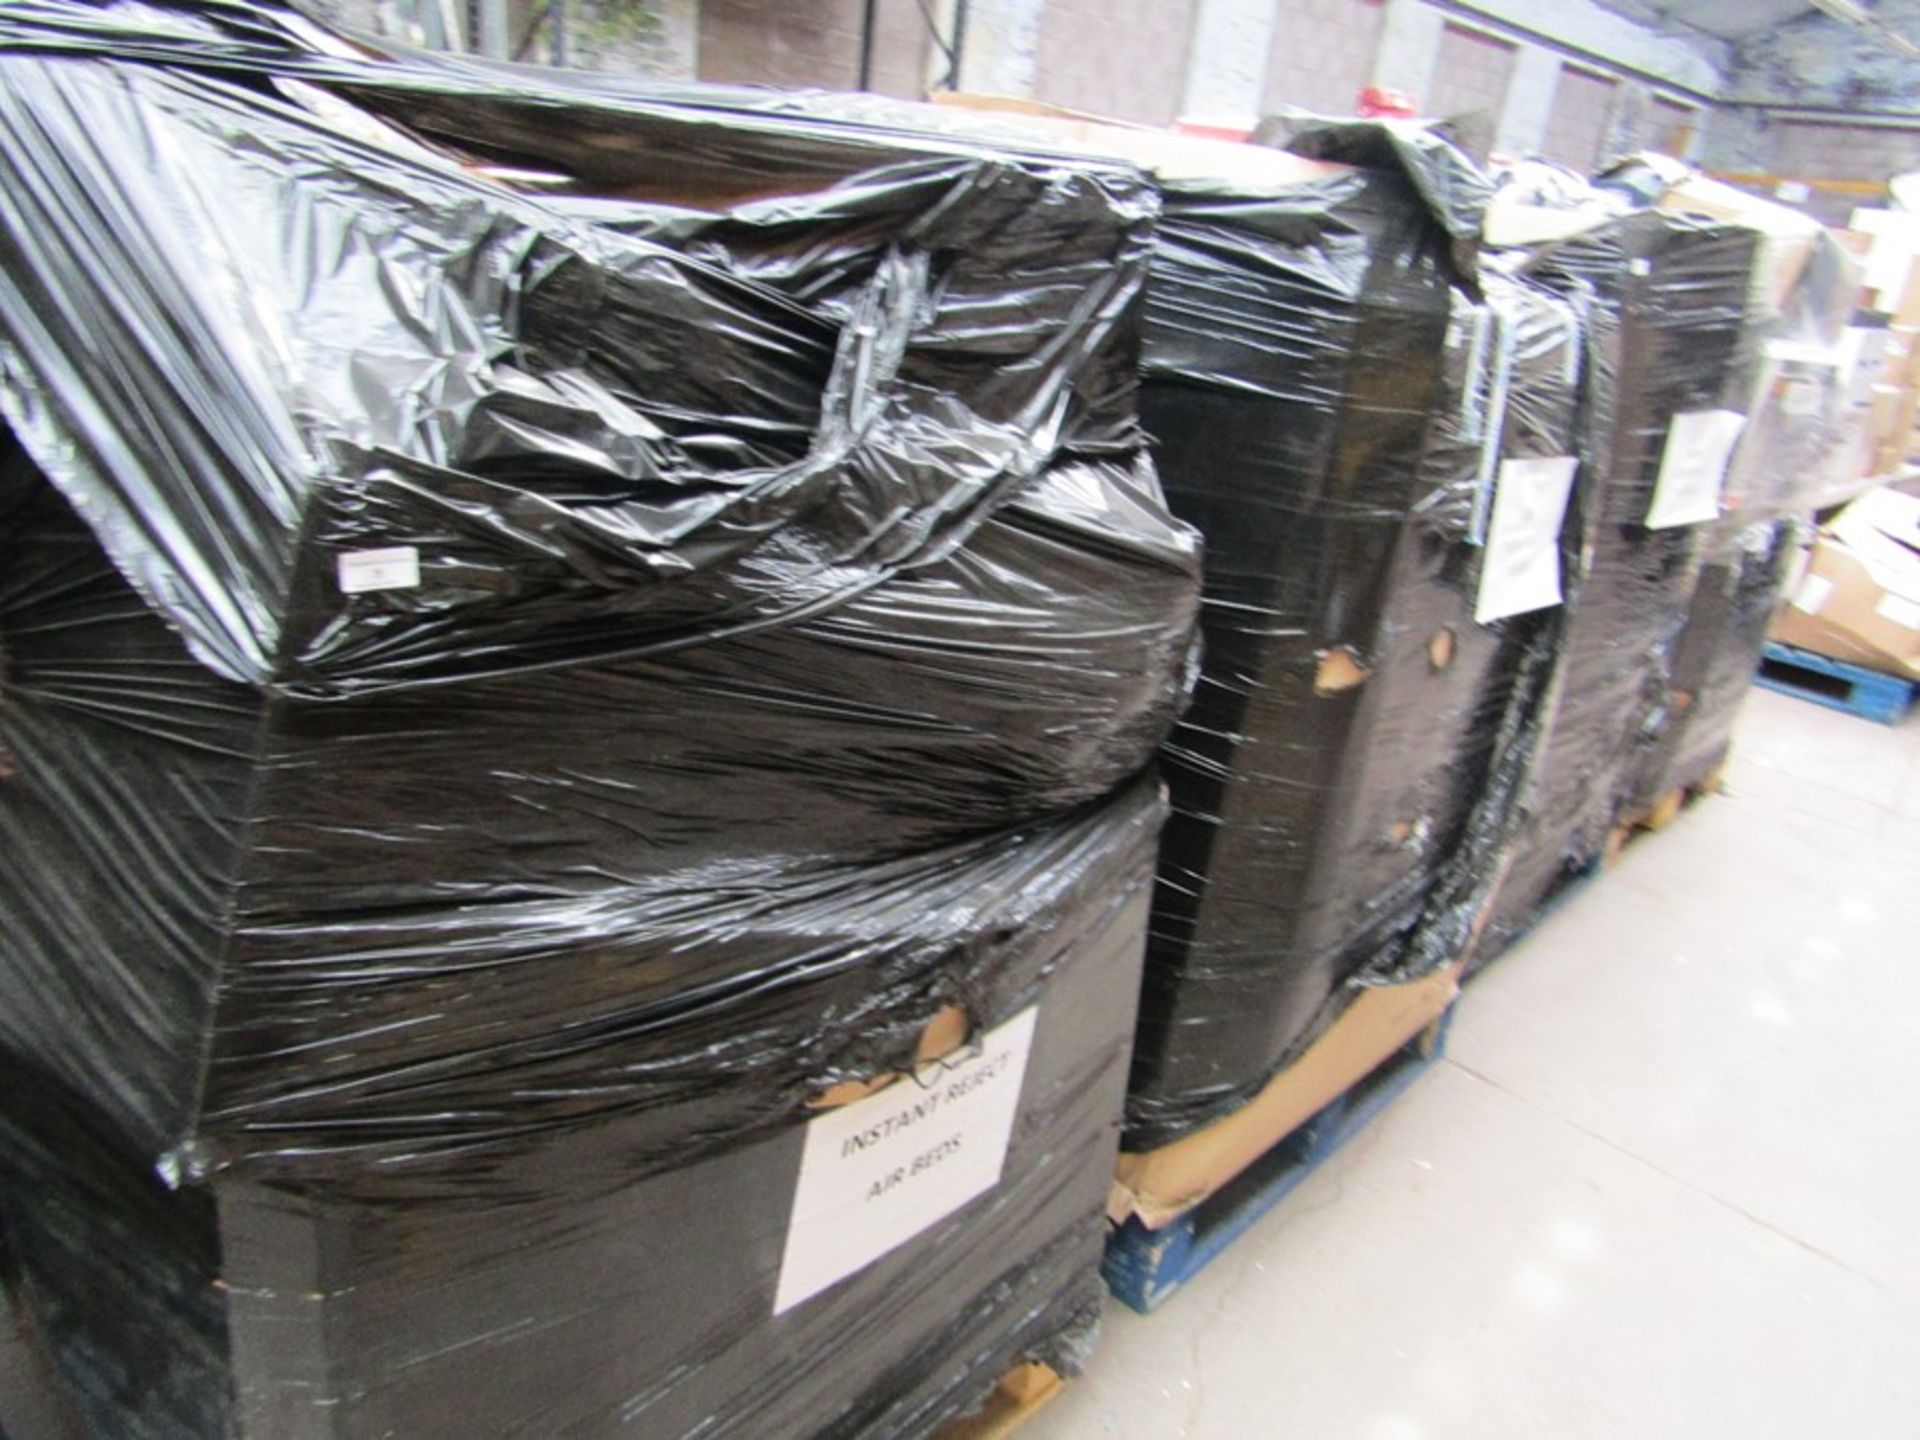 | 1x | PALLET OF UNMANIFESTED RAW CUSTOMER RETURNS AIR BEDS FROM A LARGE ONLINE RETAILER, PLEASE